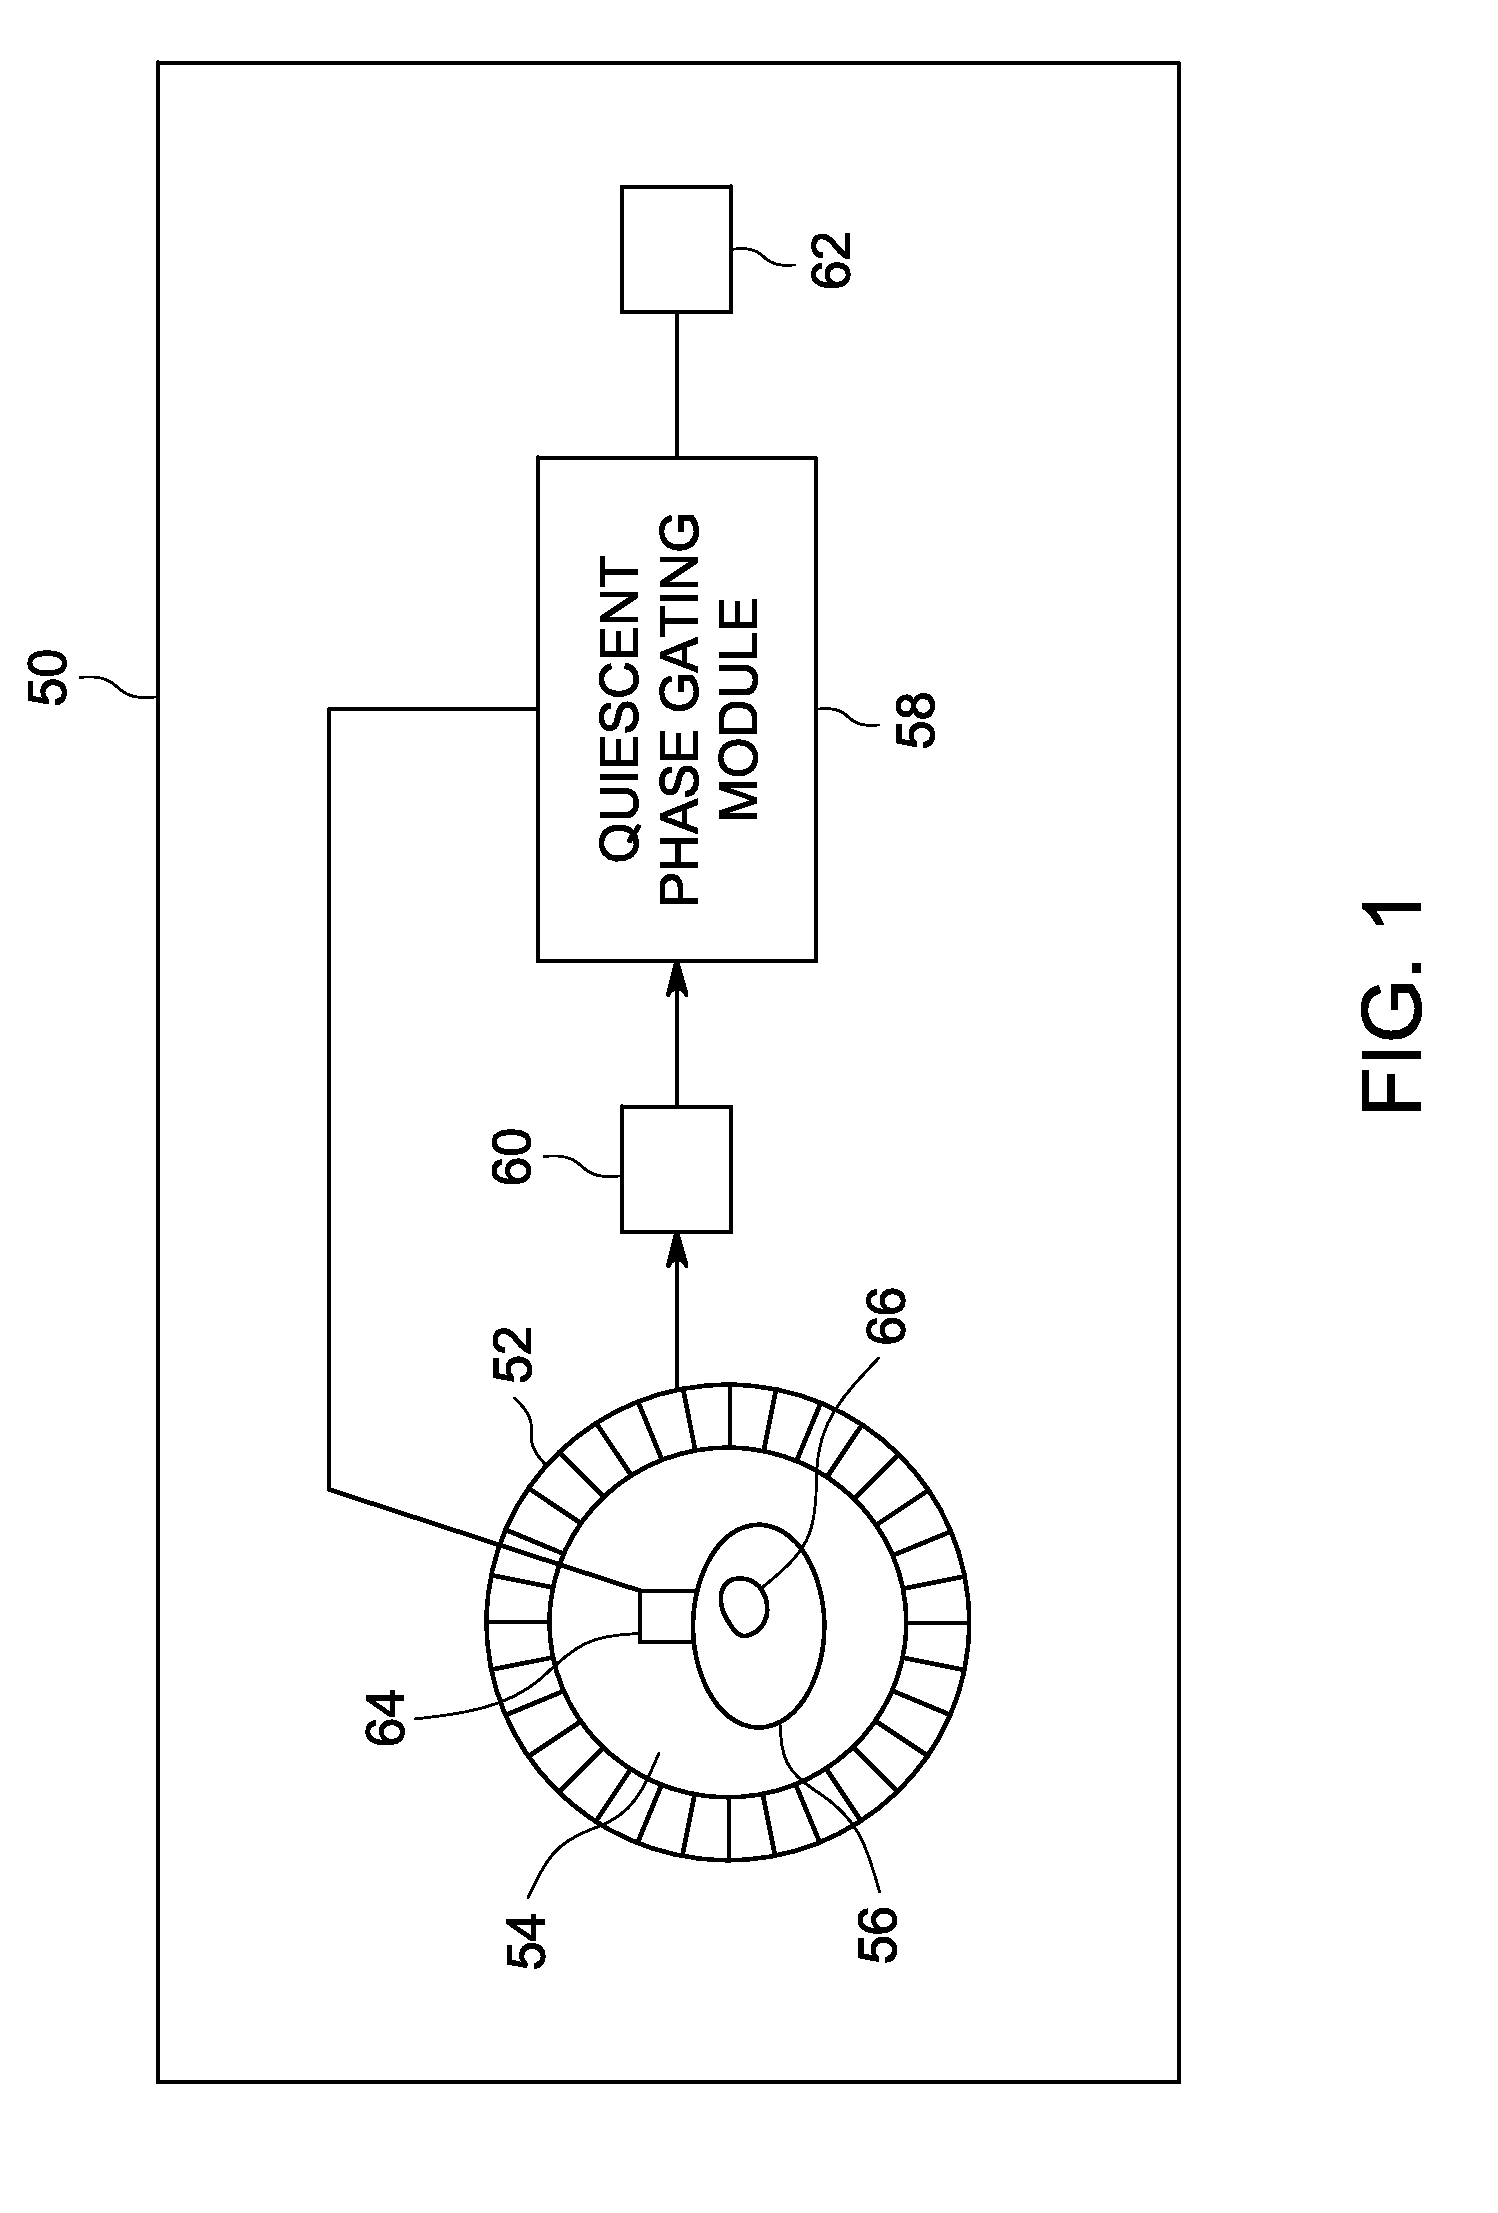 Method and apparatus for reducing motion-related imaging artifacts